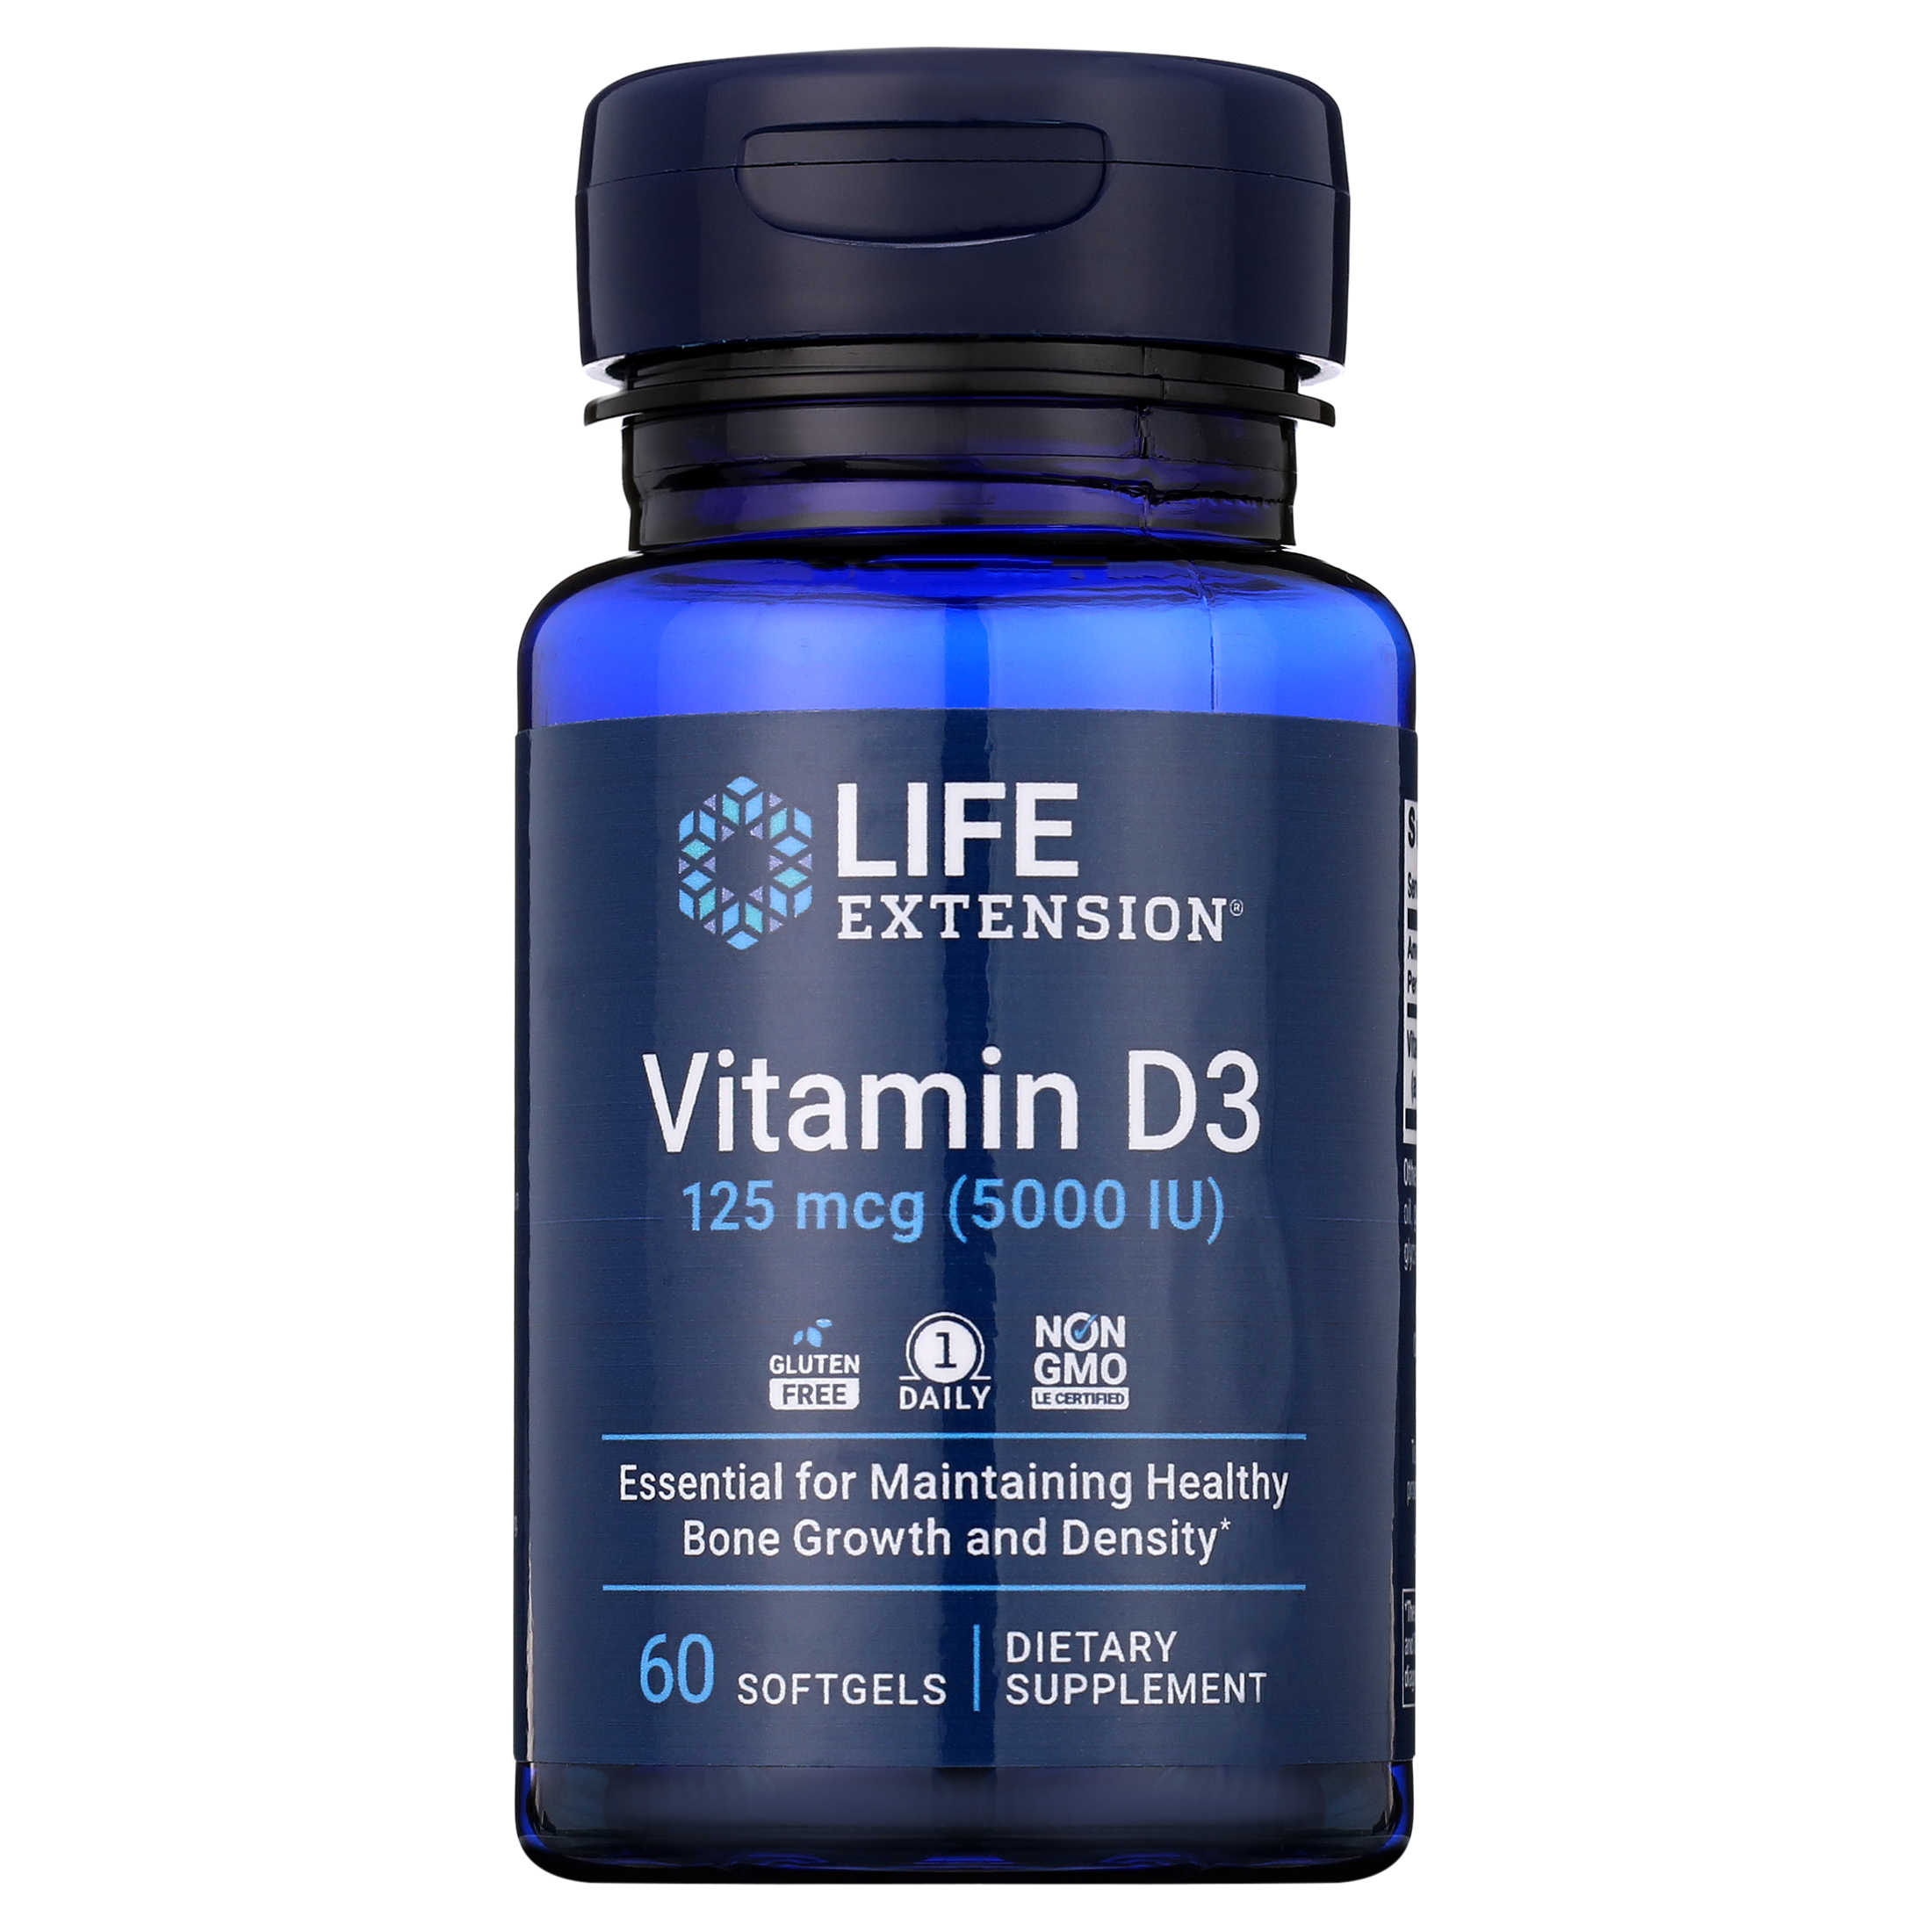 Life Extension Vitamin D3, 125 mcg (5000 IU) - Supports Bone & Immune Health, Anti-Aging & Longevity Supplements - Gluten-Free, Non-GMO, Once-Daily - 60 Softgels (2-Month Supply) - image 1 of 12